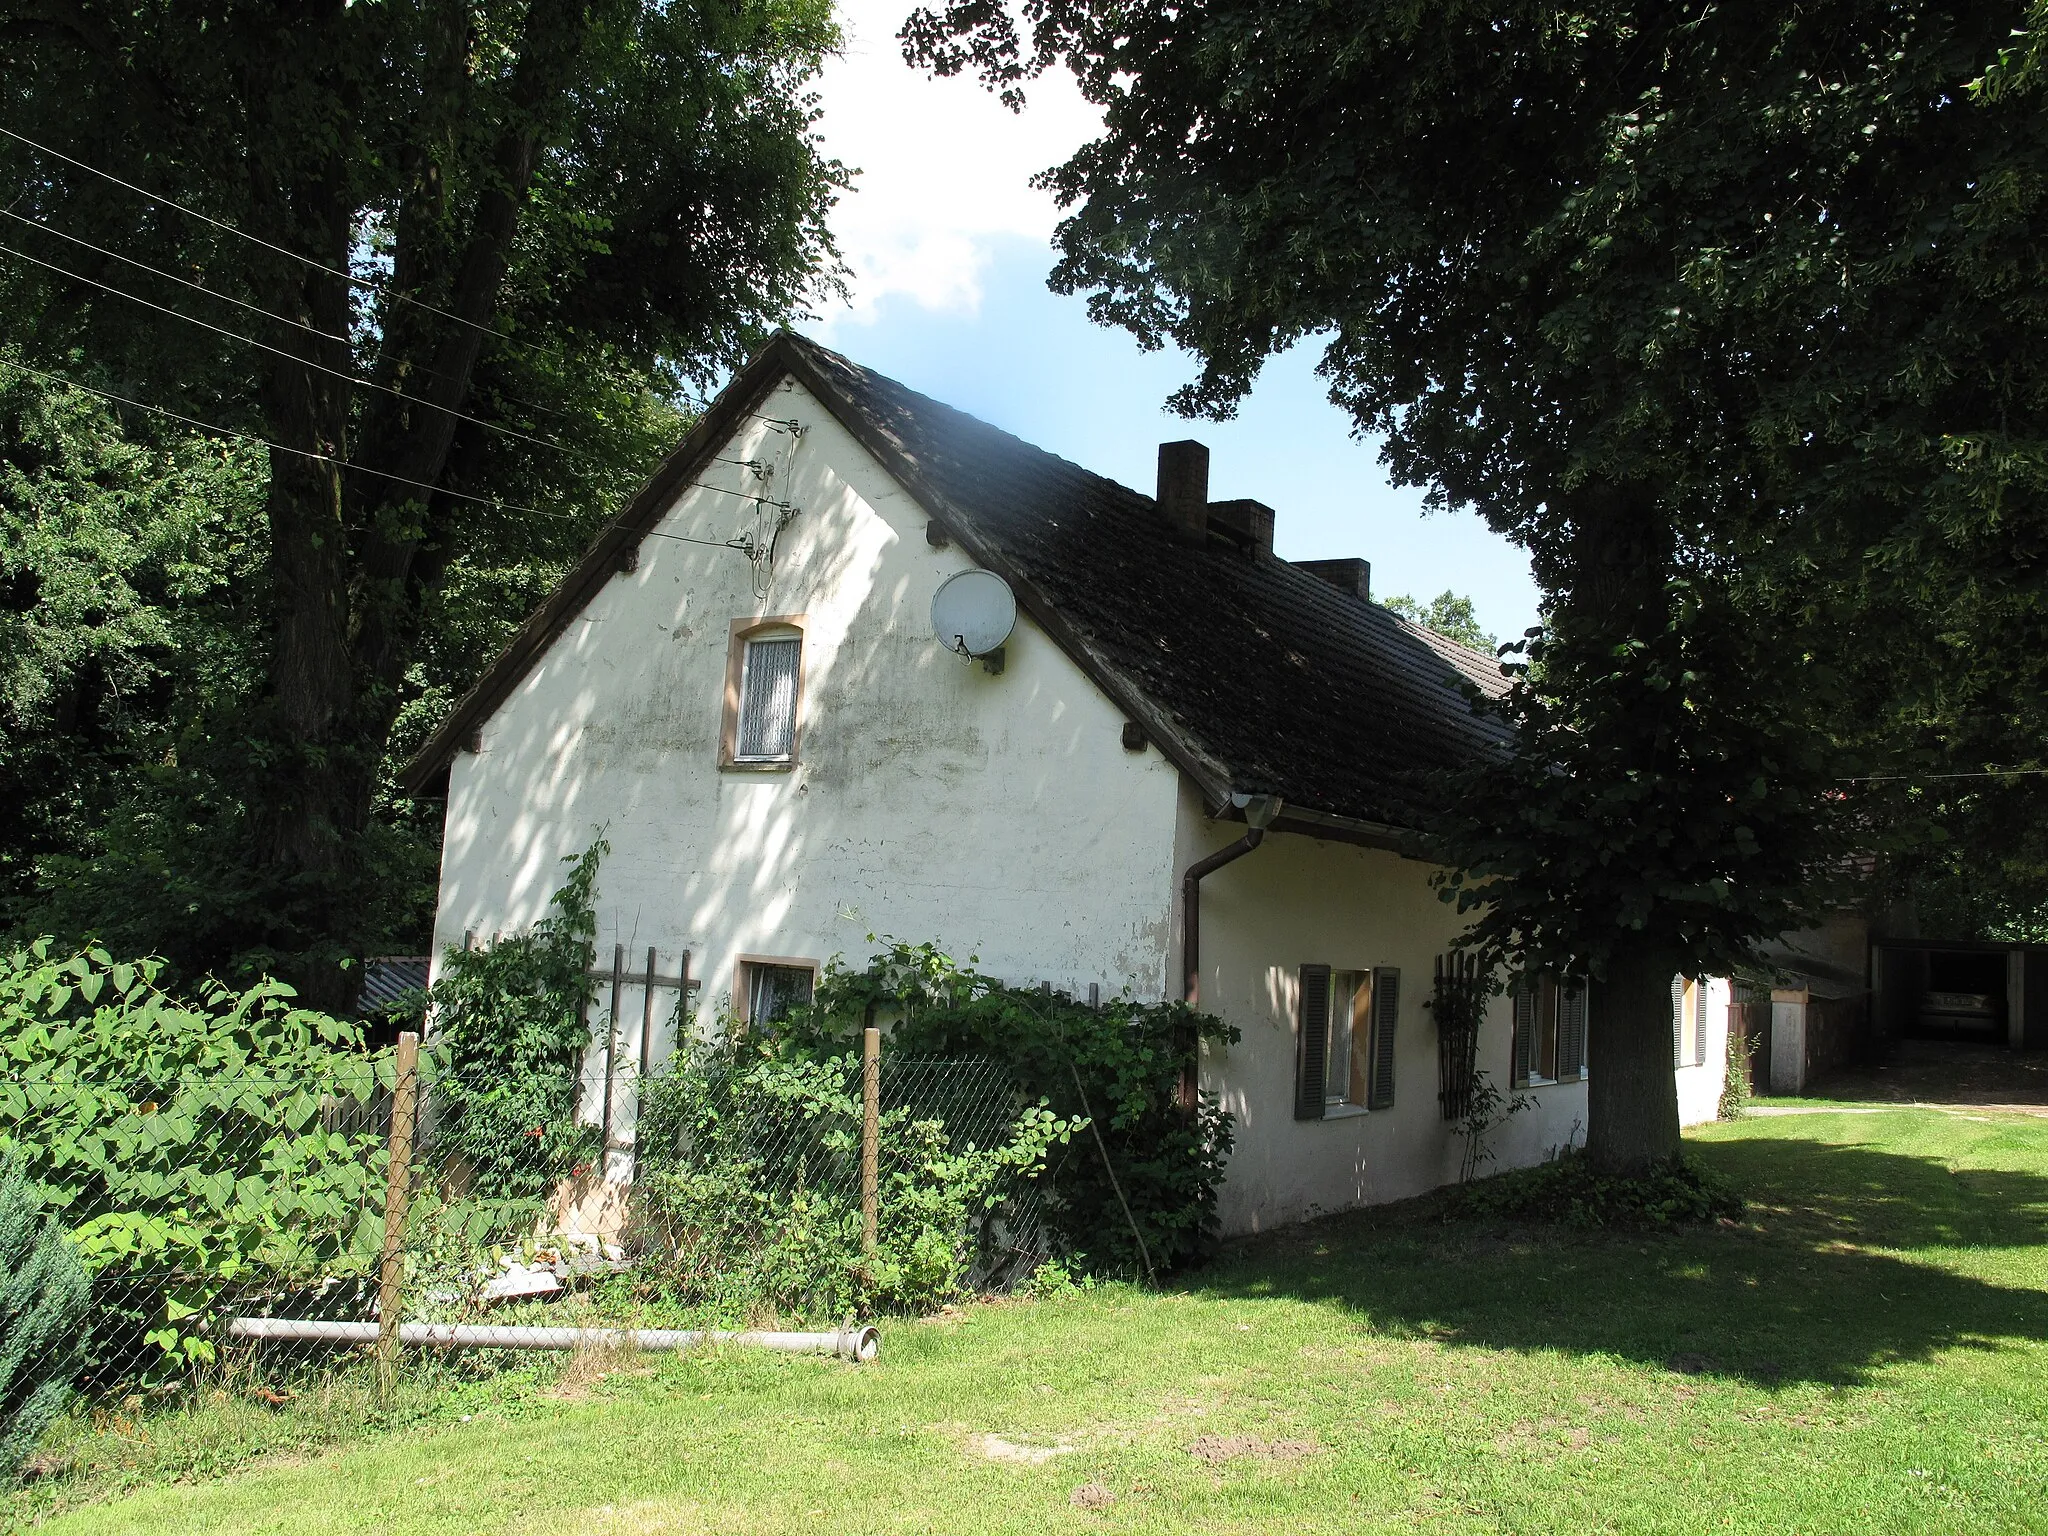 Photo showing: Former Grundmühle, one of the three historical watermills of the Blabbergraben, at the southern shore of the Lindenberger See. The mill was pulled down in 1927, its area is still inhabited. The Lindenberger See is a lake in the village Lindenberg, a part (german: Ortsteil) of the municipality Tauche in the District Oder-Spree, Brandenburg, Germany. The lake covers 6 hectare. The long-drawn groove lake is, seen from the north, the second water of a five-part chain of lakes, which is connected by the Blabbergraben. The Blabbergraben drains the lakes to the south into the river Spree.